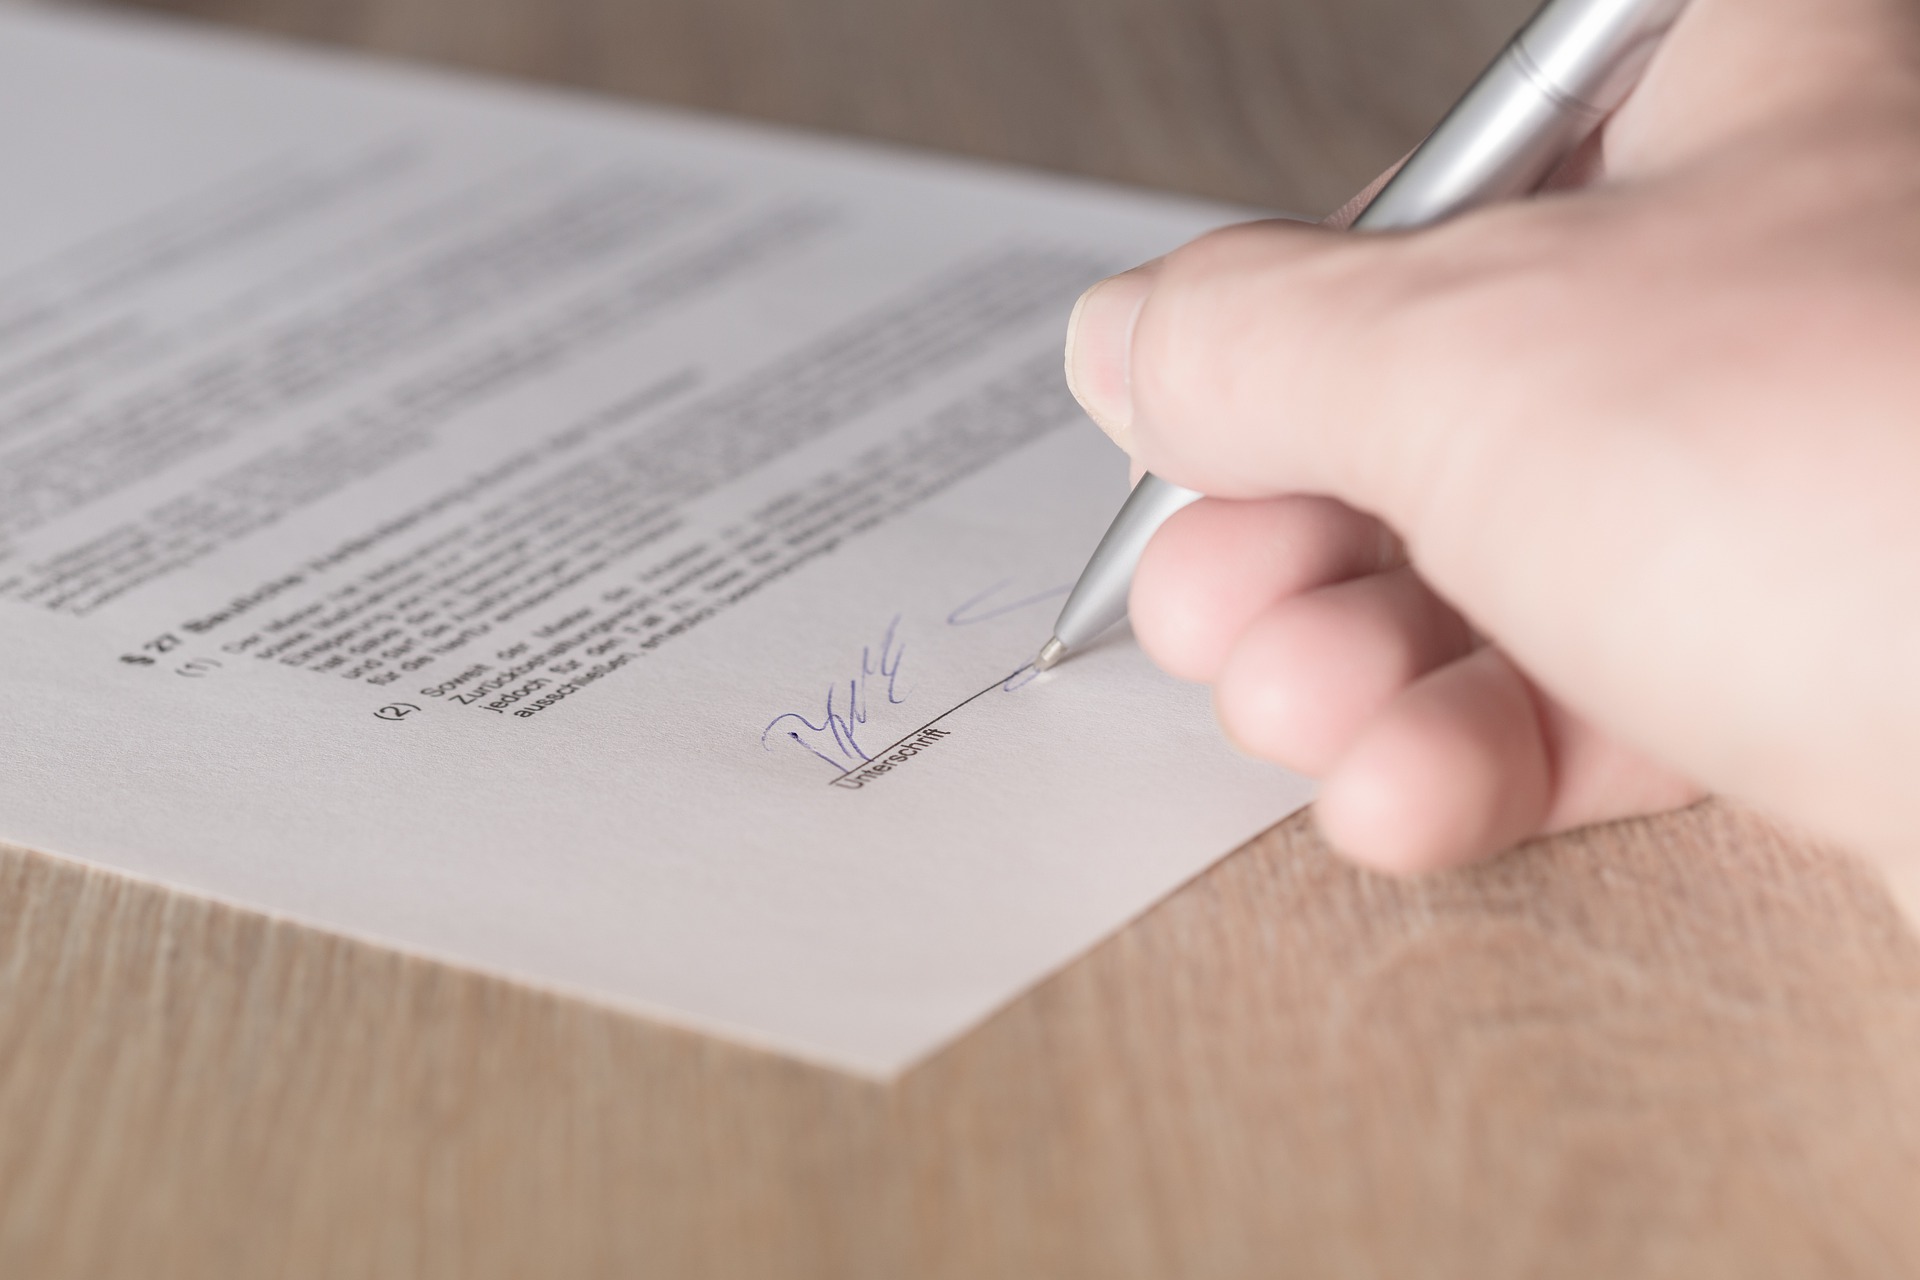 CONTRACTS AND COMMERCIAL AGREEMENTS: IS IT ENOUGH TO TRANSLATE THEM INTO ENGLISH?